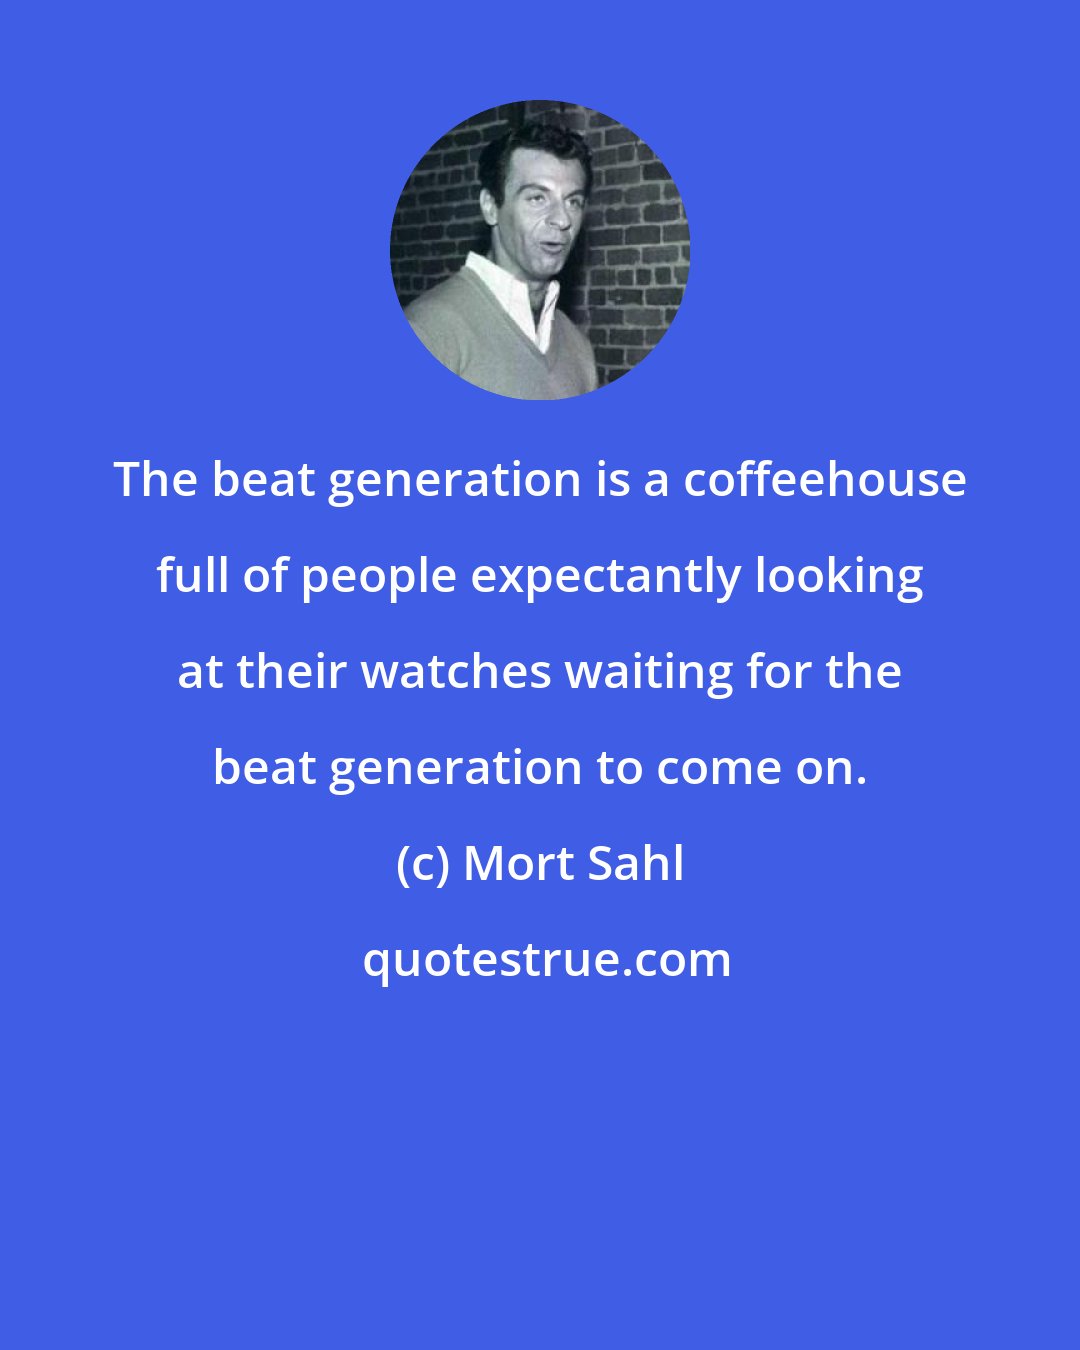 Mort Sahl: The beat generation is a coffeehouse full of people expectantly looking at their watches waiting for the beat generation to come on.